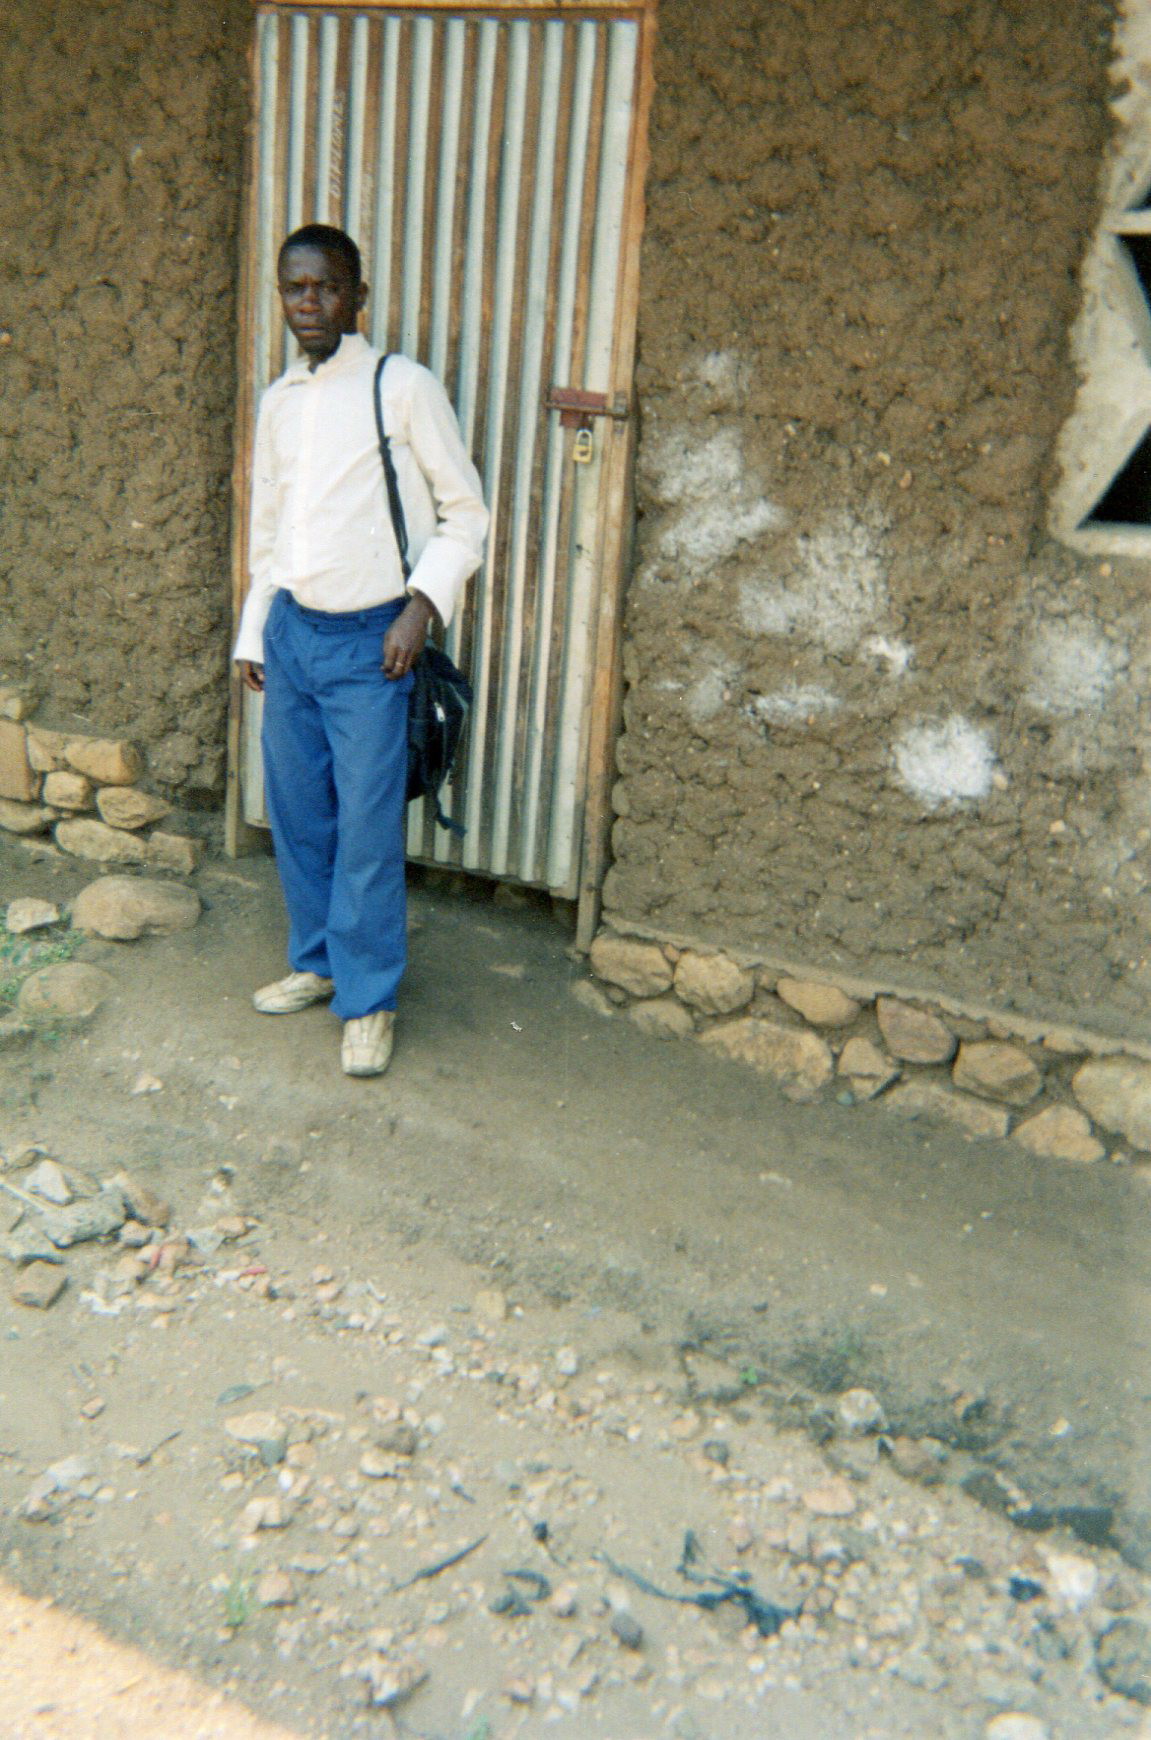  This photo shows that due to lack of money, I was sent away from school. We recommend to both local and international NGOs that the lack of financial resources is the biggest barrier to long-term education reintegration.&nbsp; 